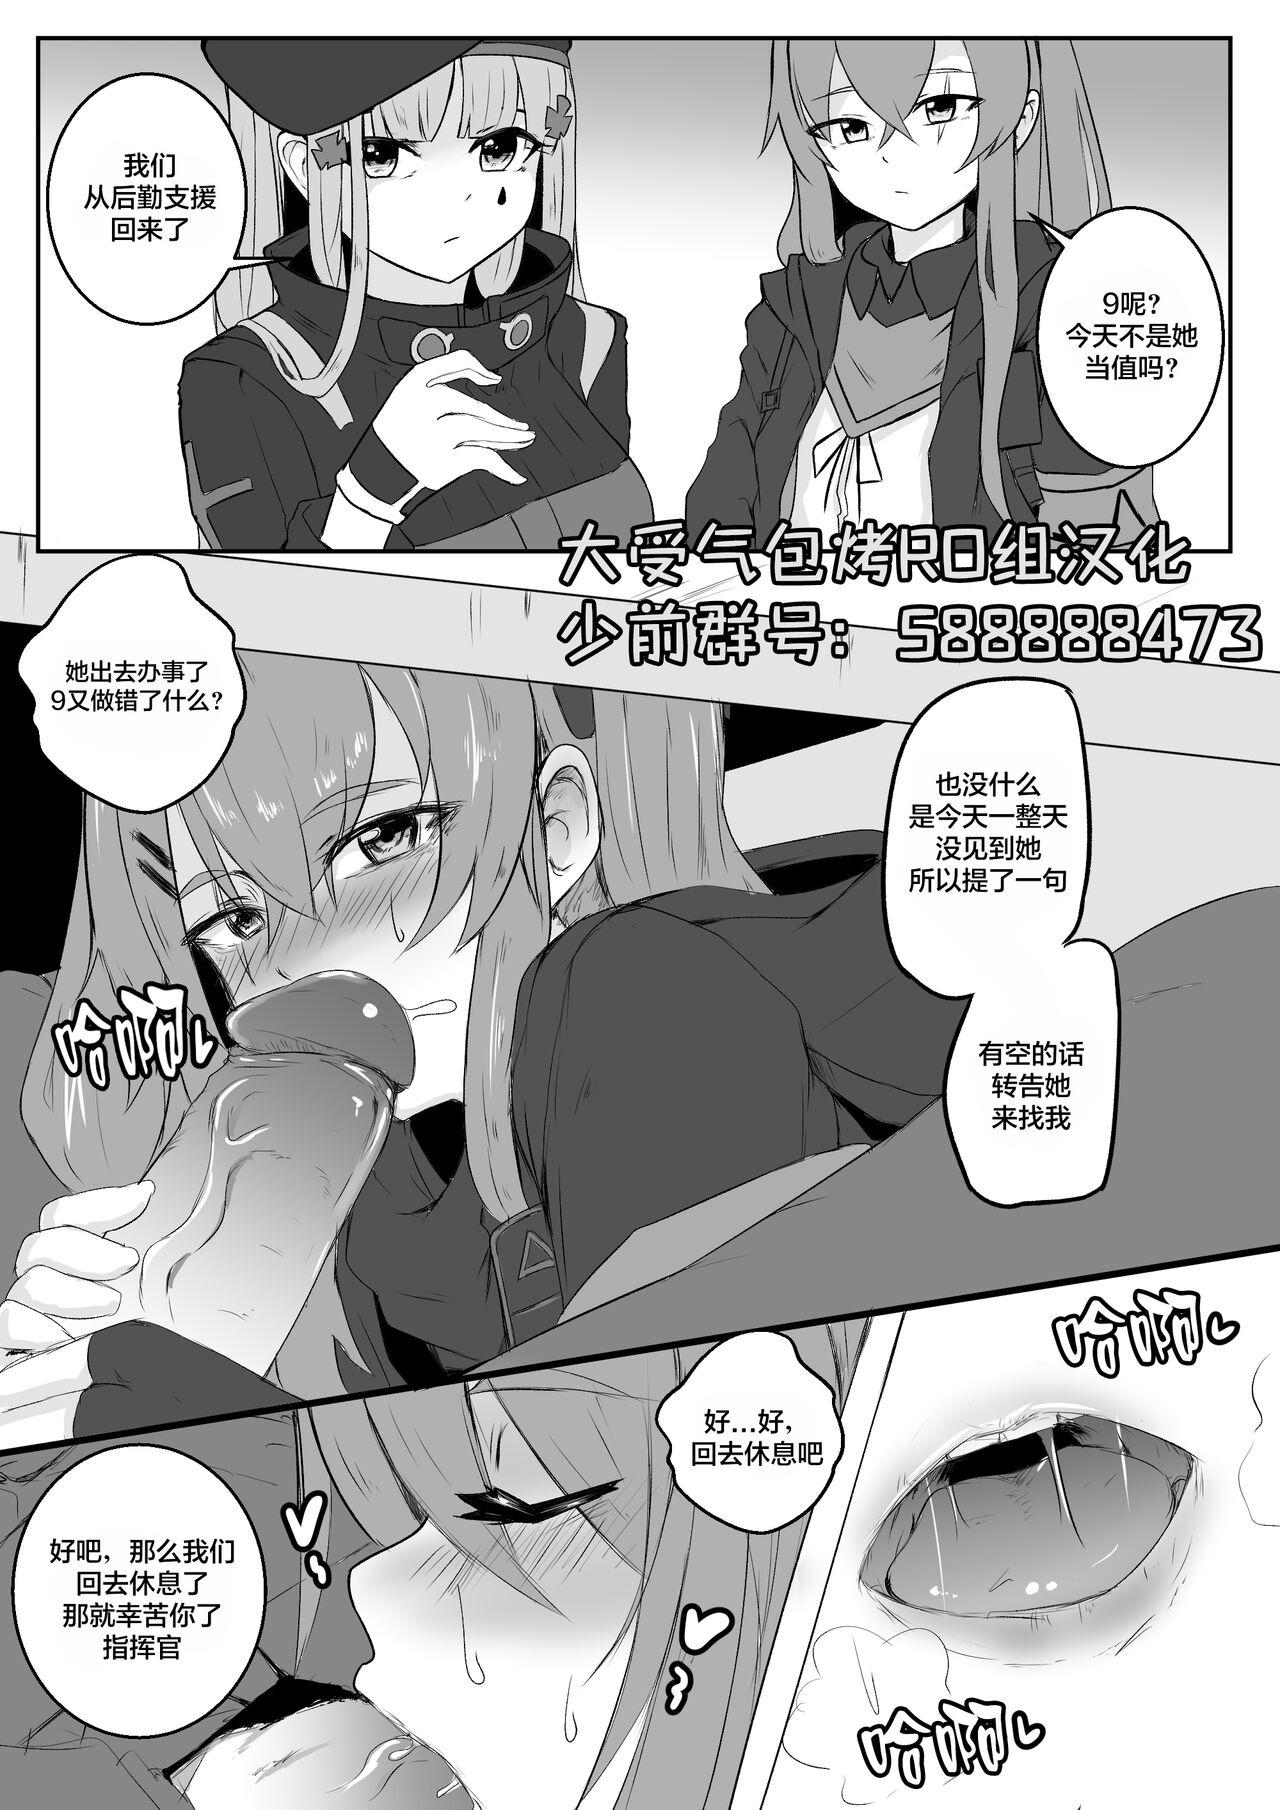 Leche UMP9, UMP45 - Girls frontline Spooning - Picture 1